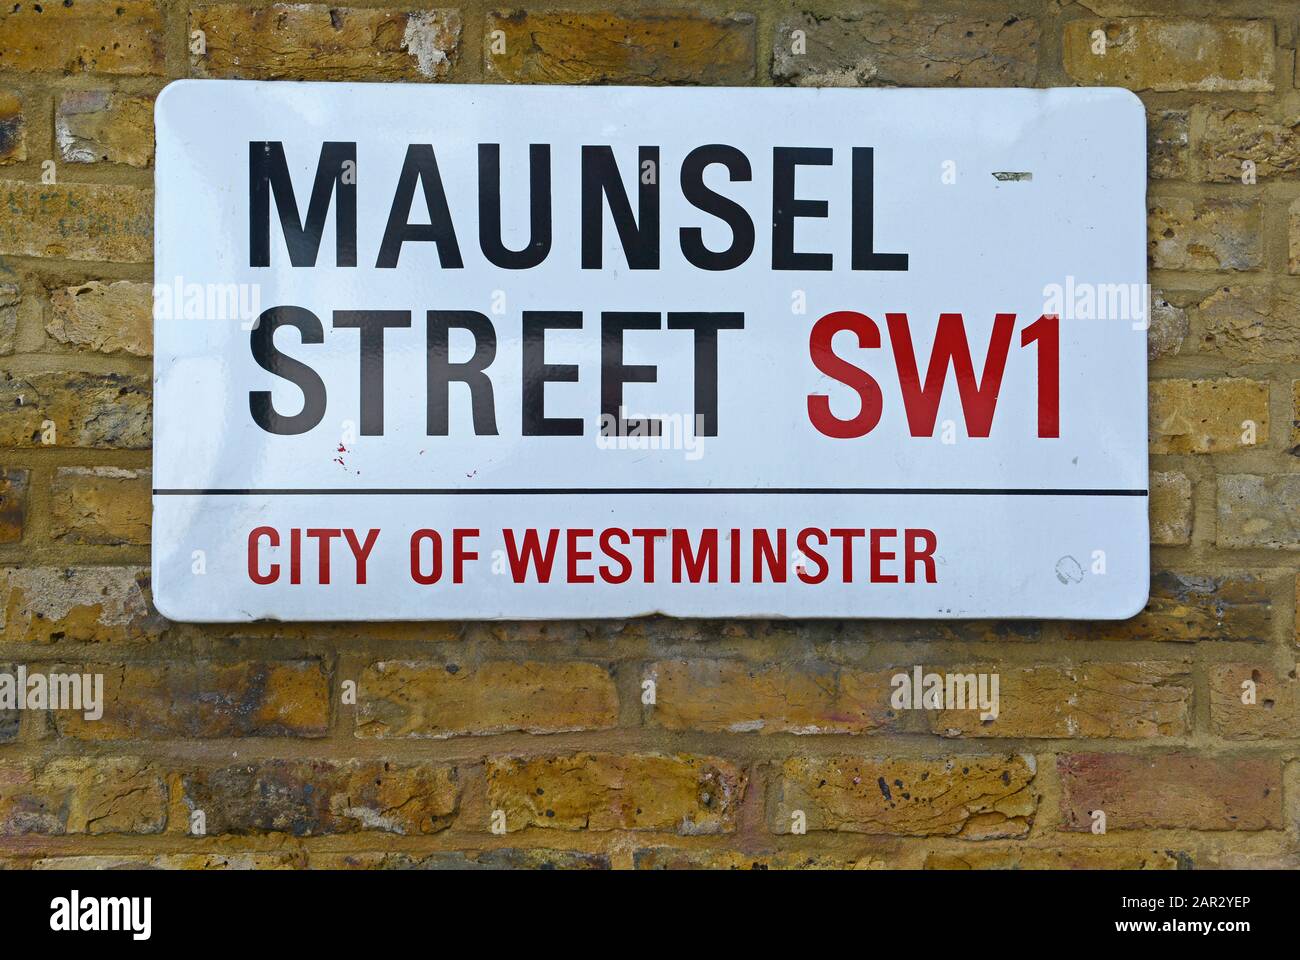 Maunsel Street street sign in the City of Westminster SW1 on the side of a building. London, UK. Stock Photo